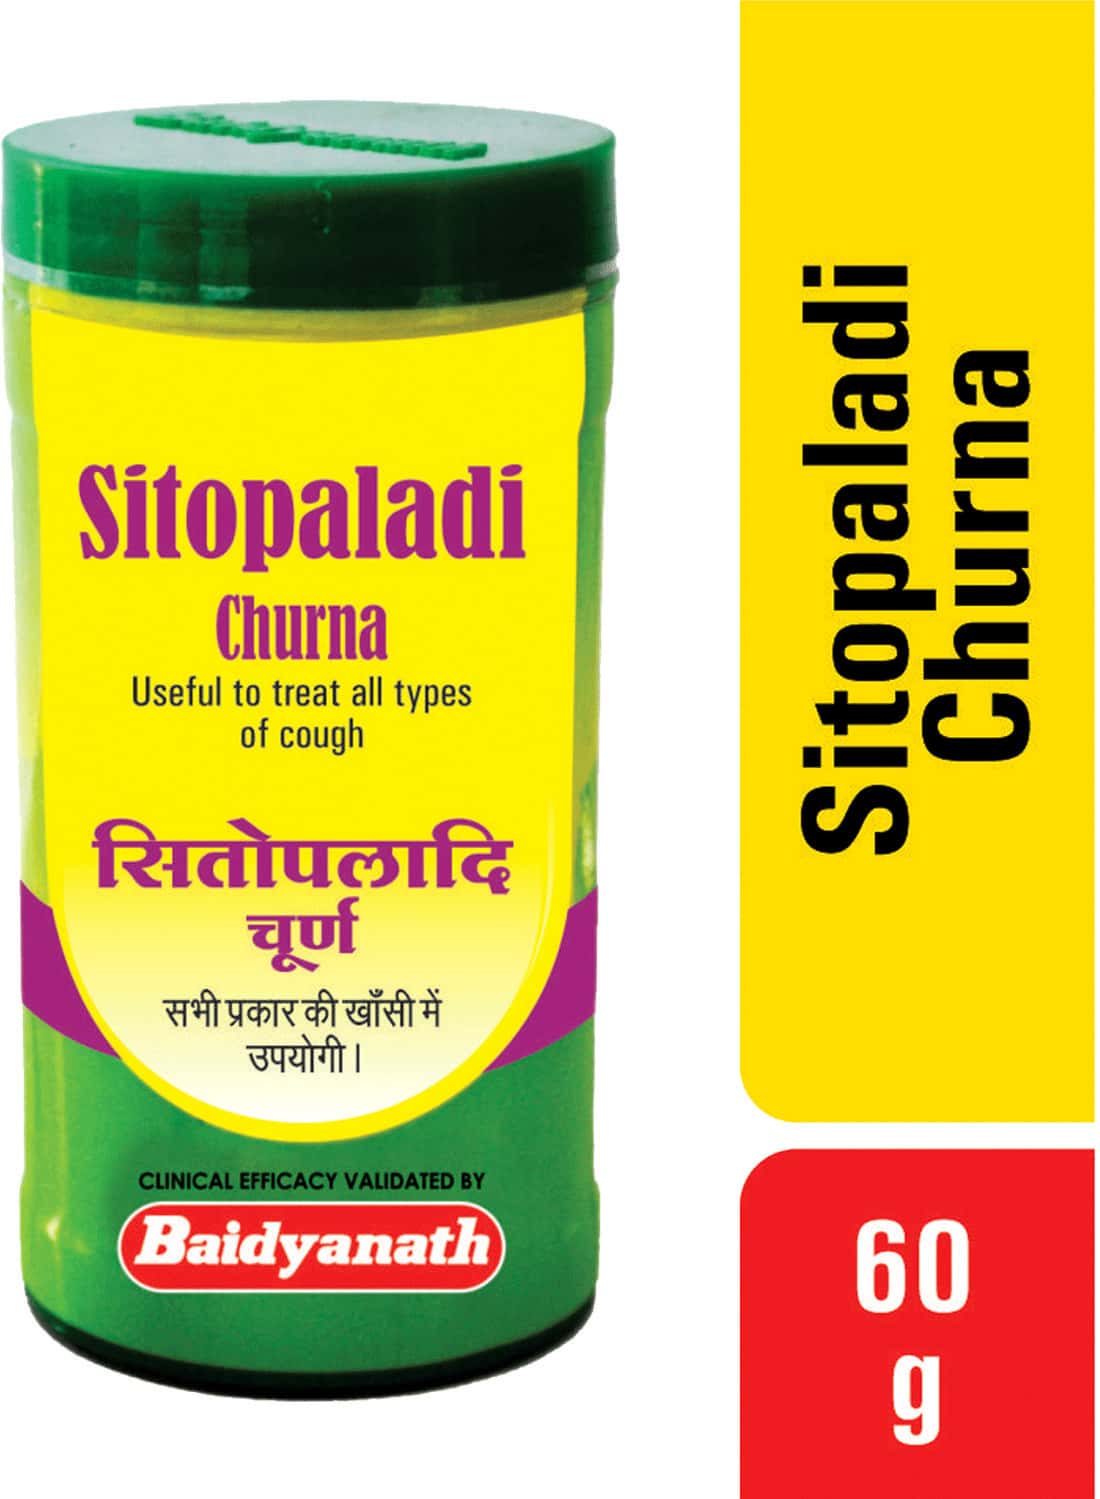 Baidyanath Nagpur Sitopaladi Churna - 60 Gm (Pack Of 2) For Dry Wet And Allergic Cough